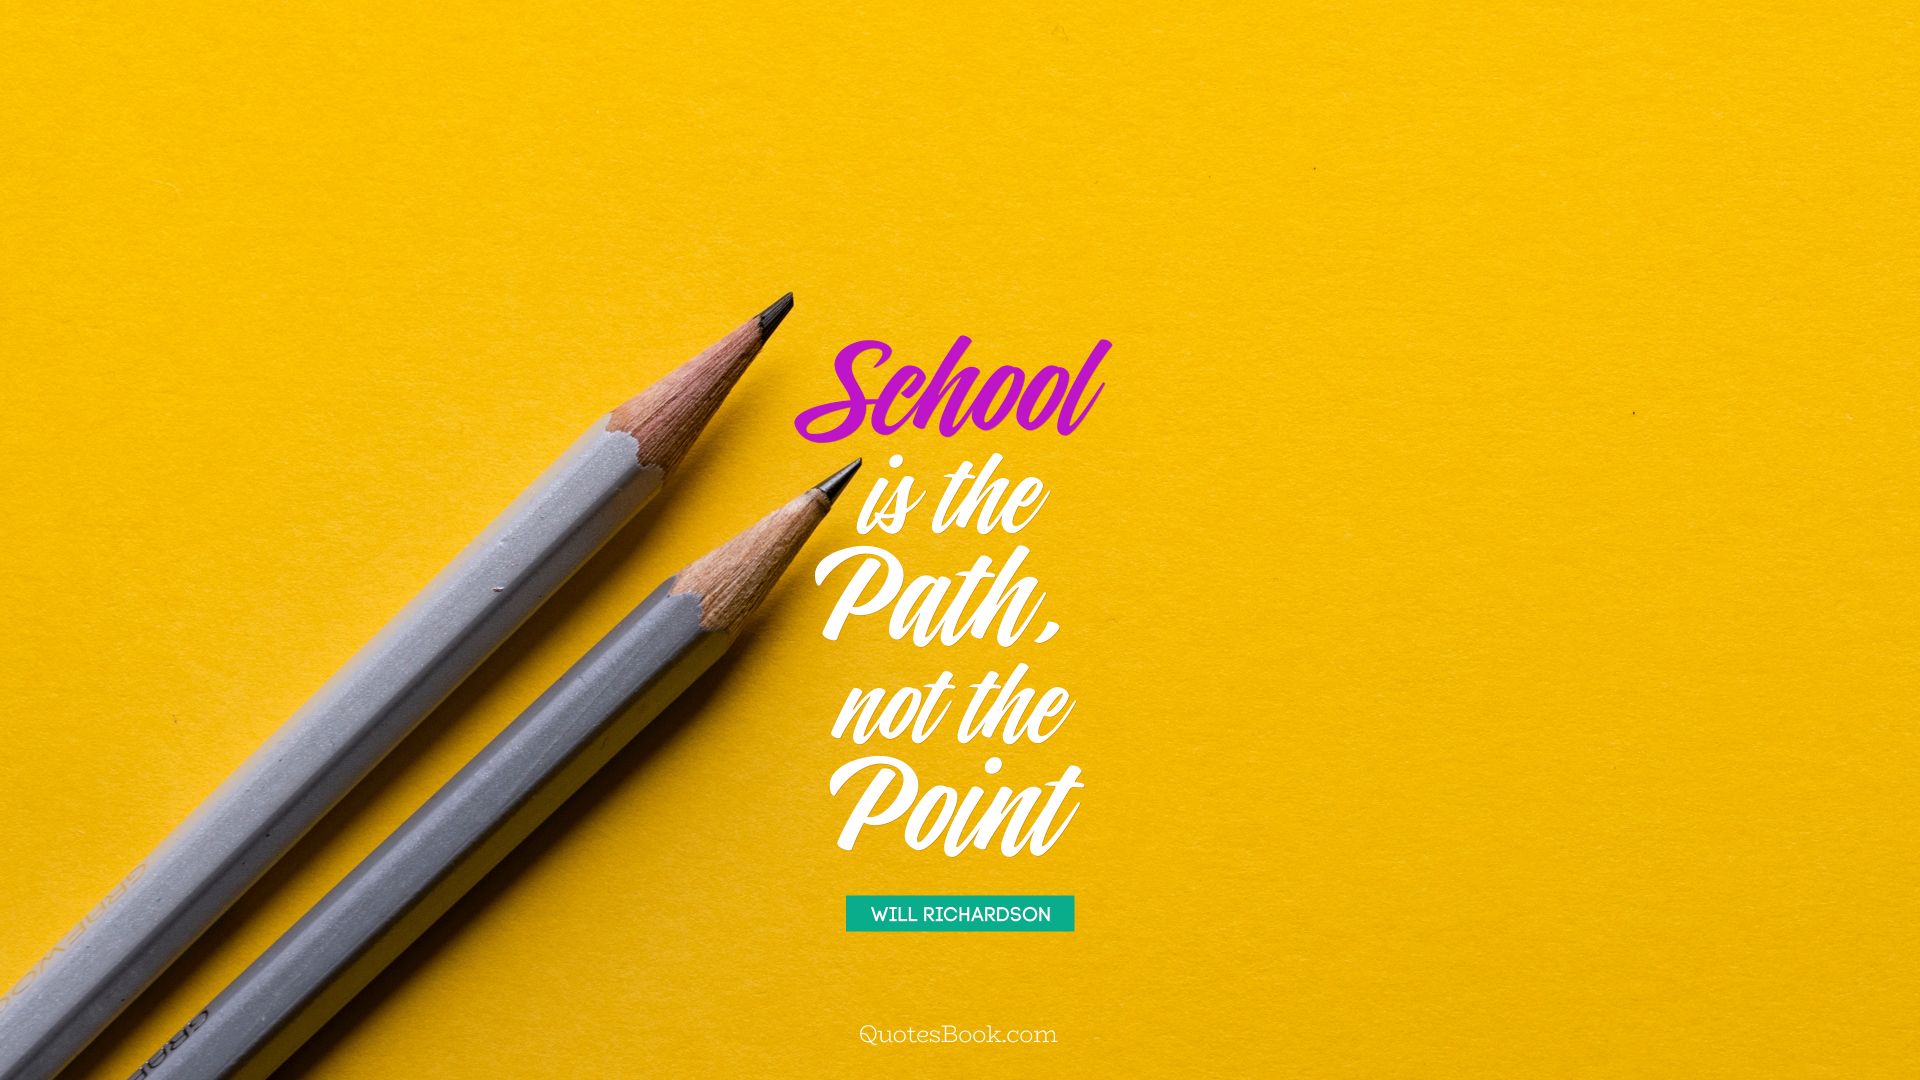 School is the path, not the point. - Quote by Will Richardson